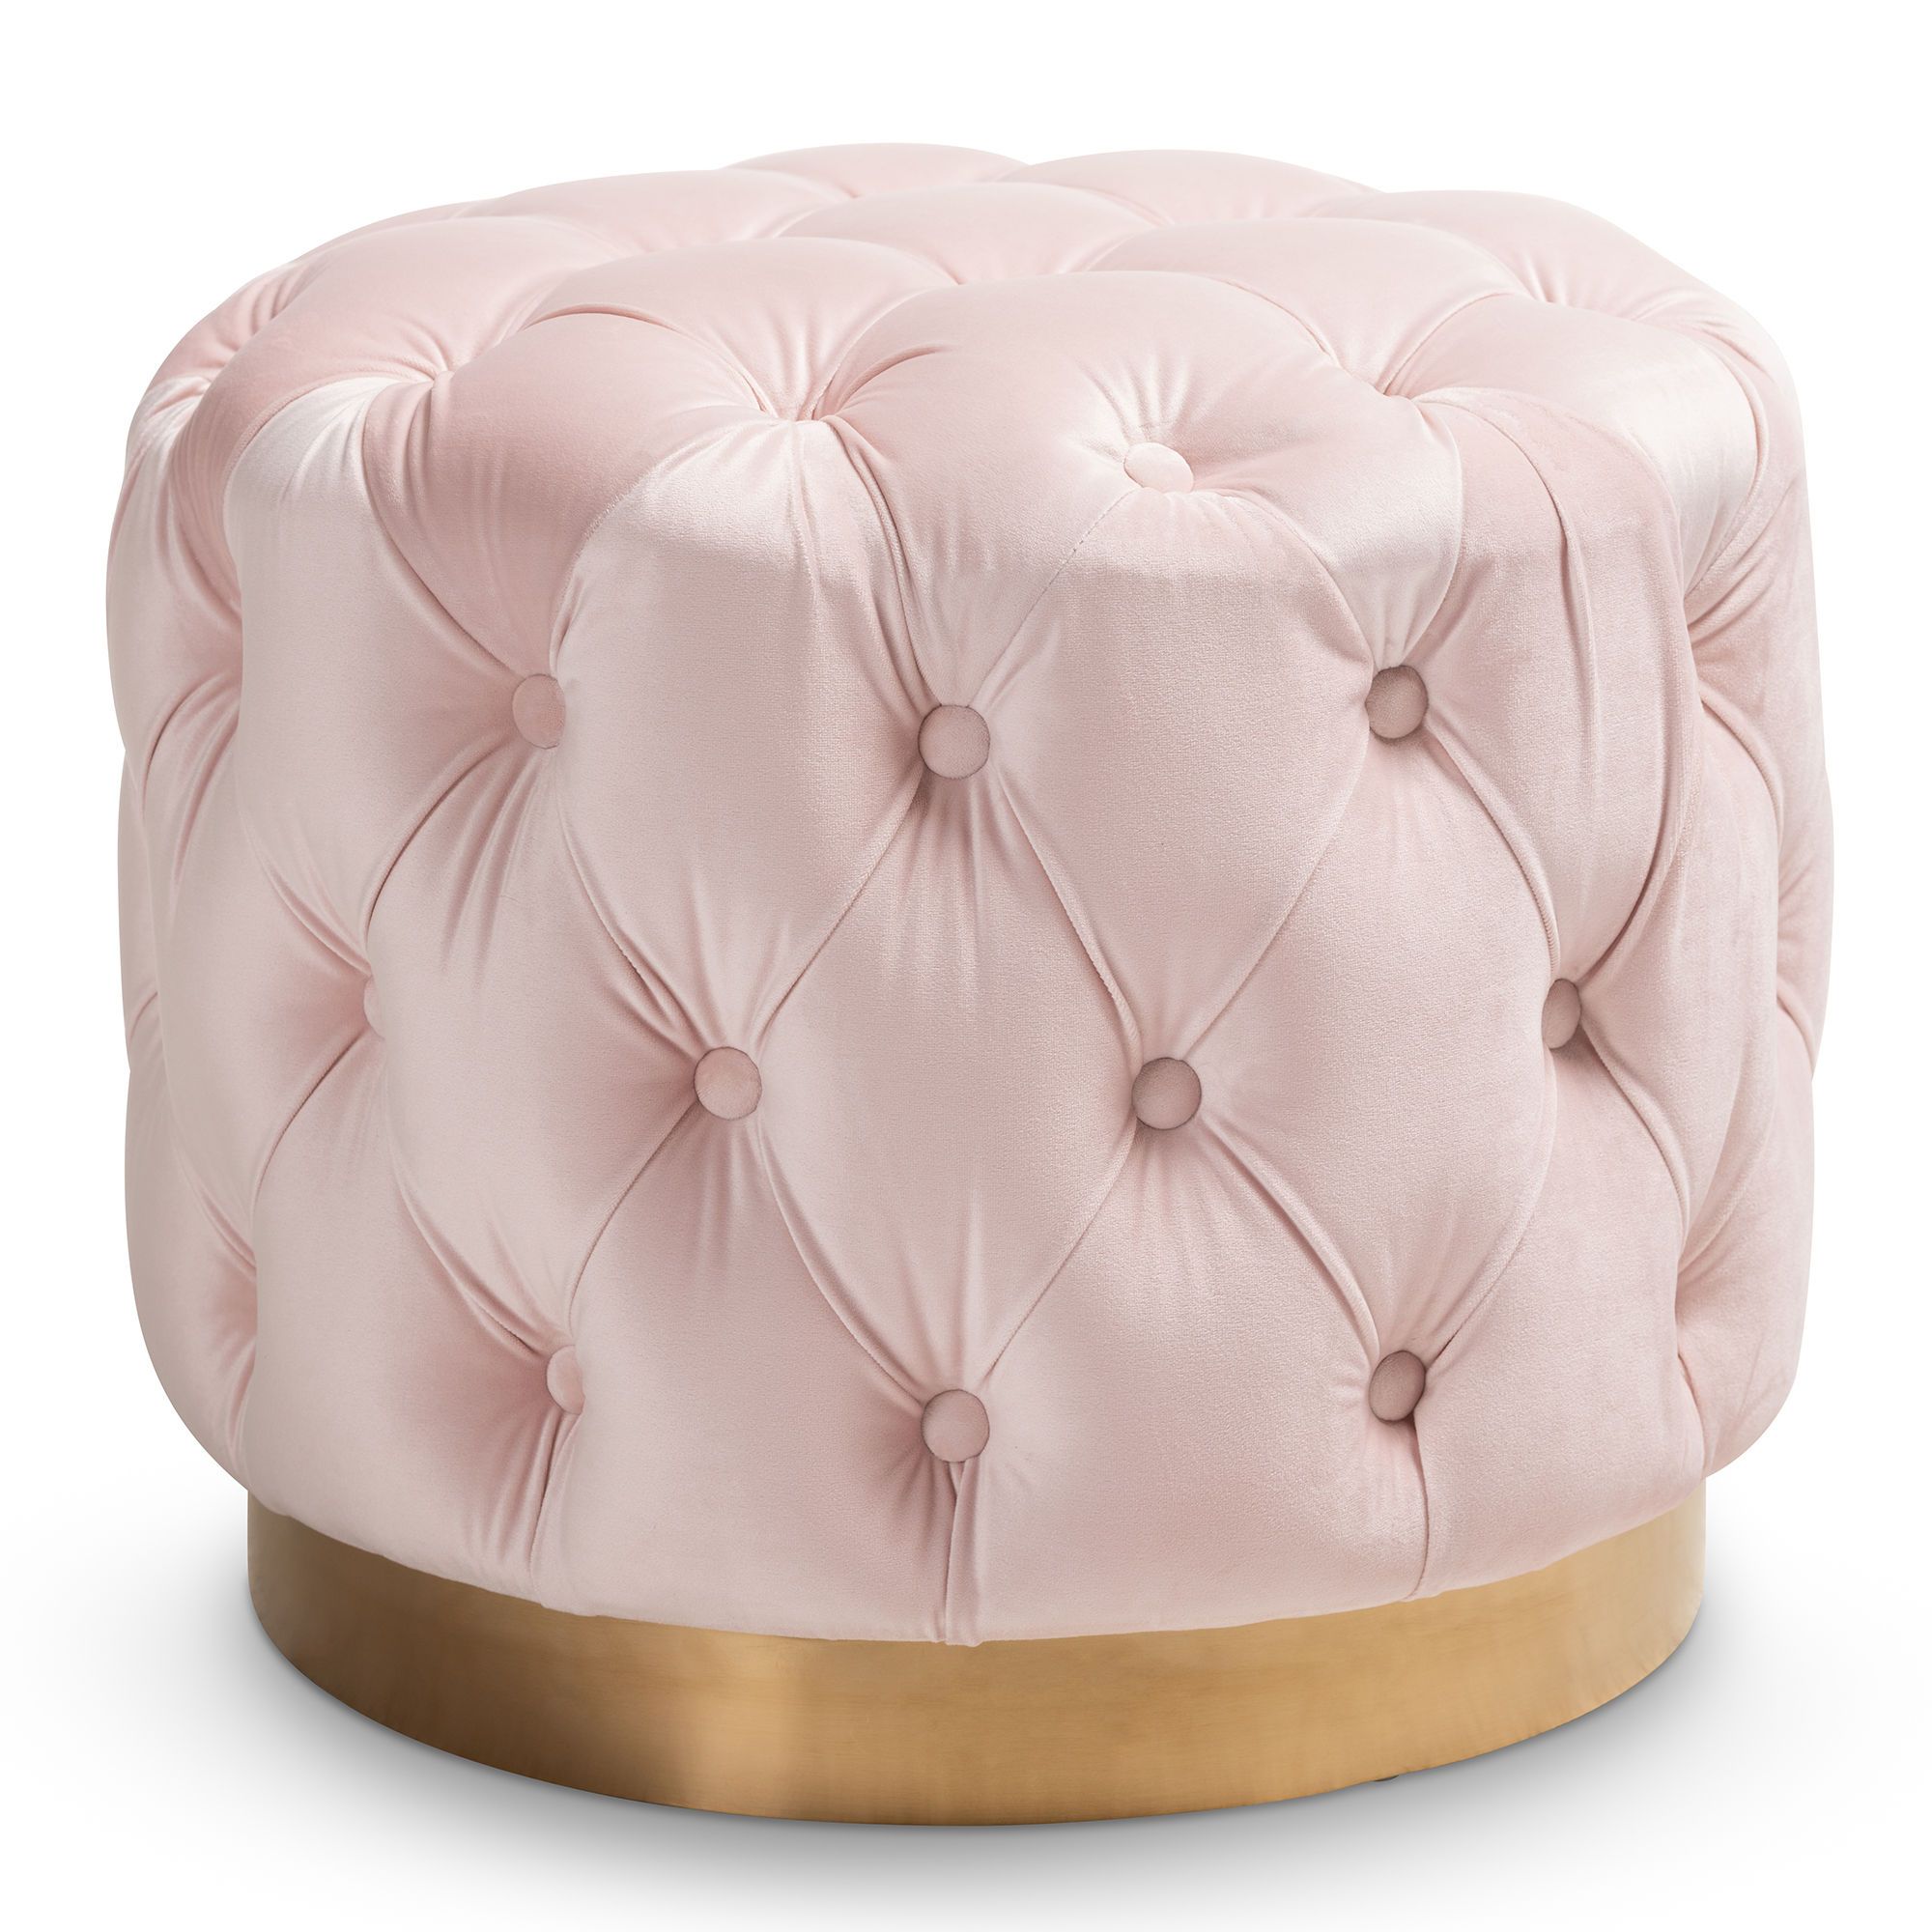 The Intended For Best And Newest Glam Light Pink Velvet Tufted Ottomans (View 1 of 10)